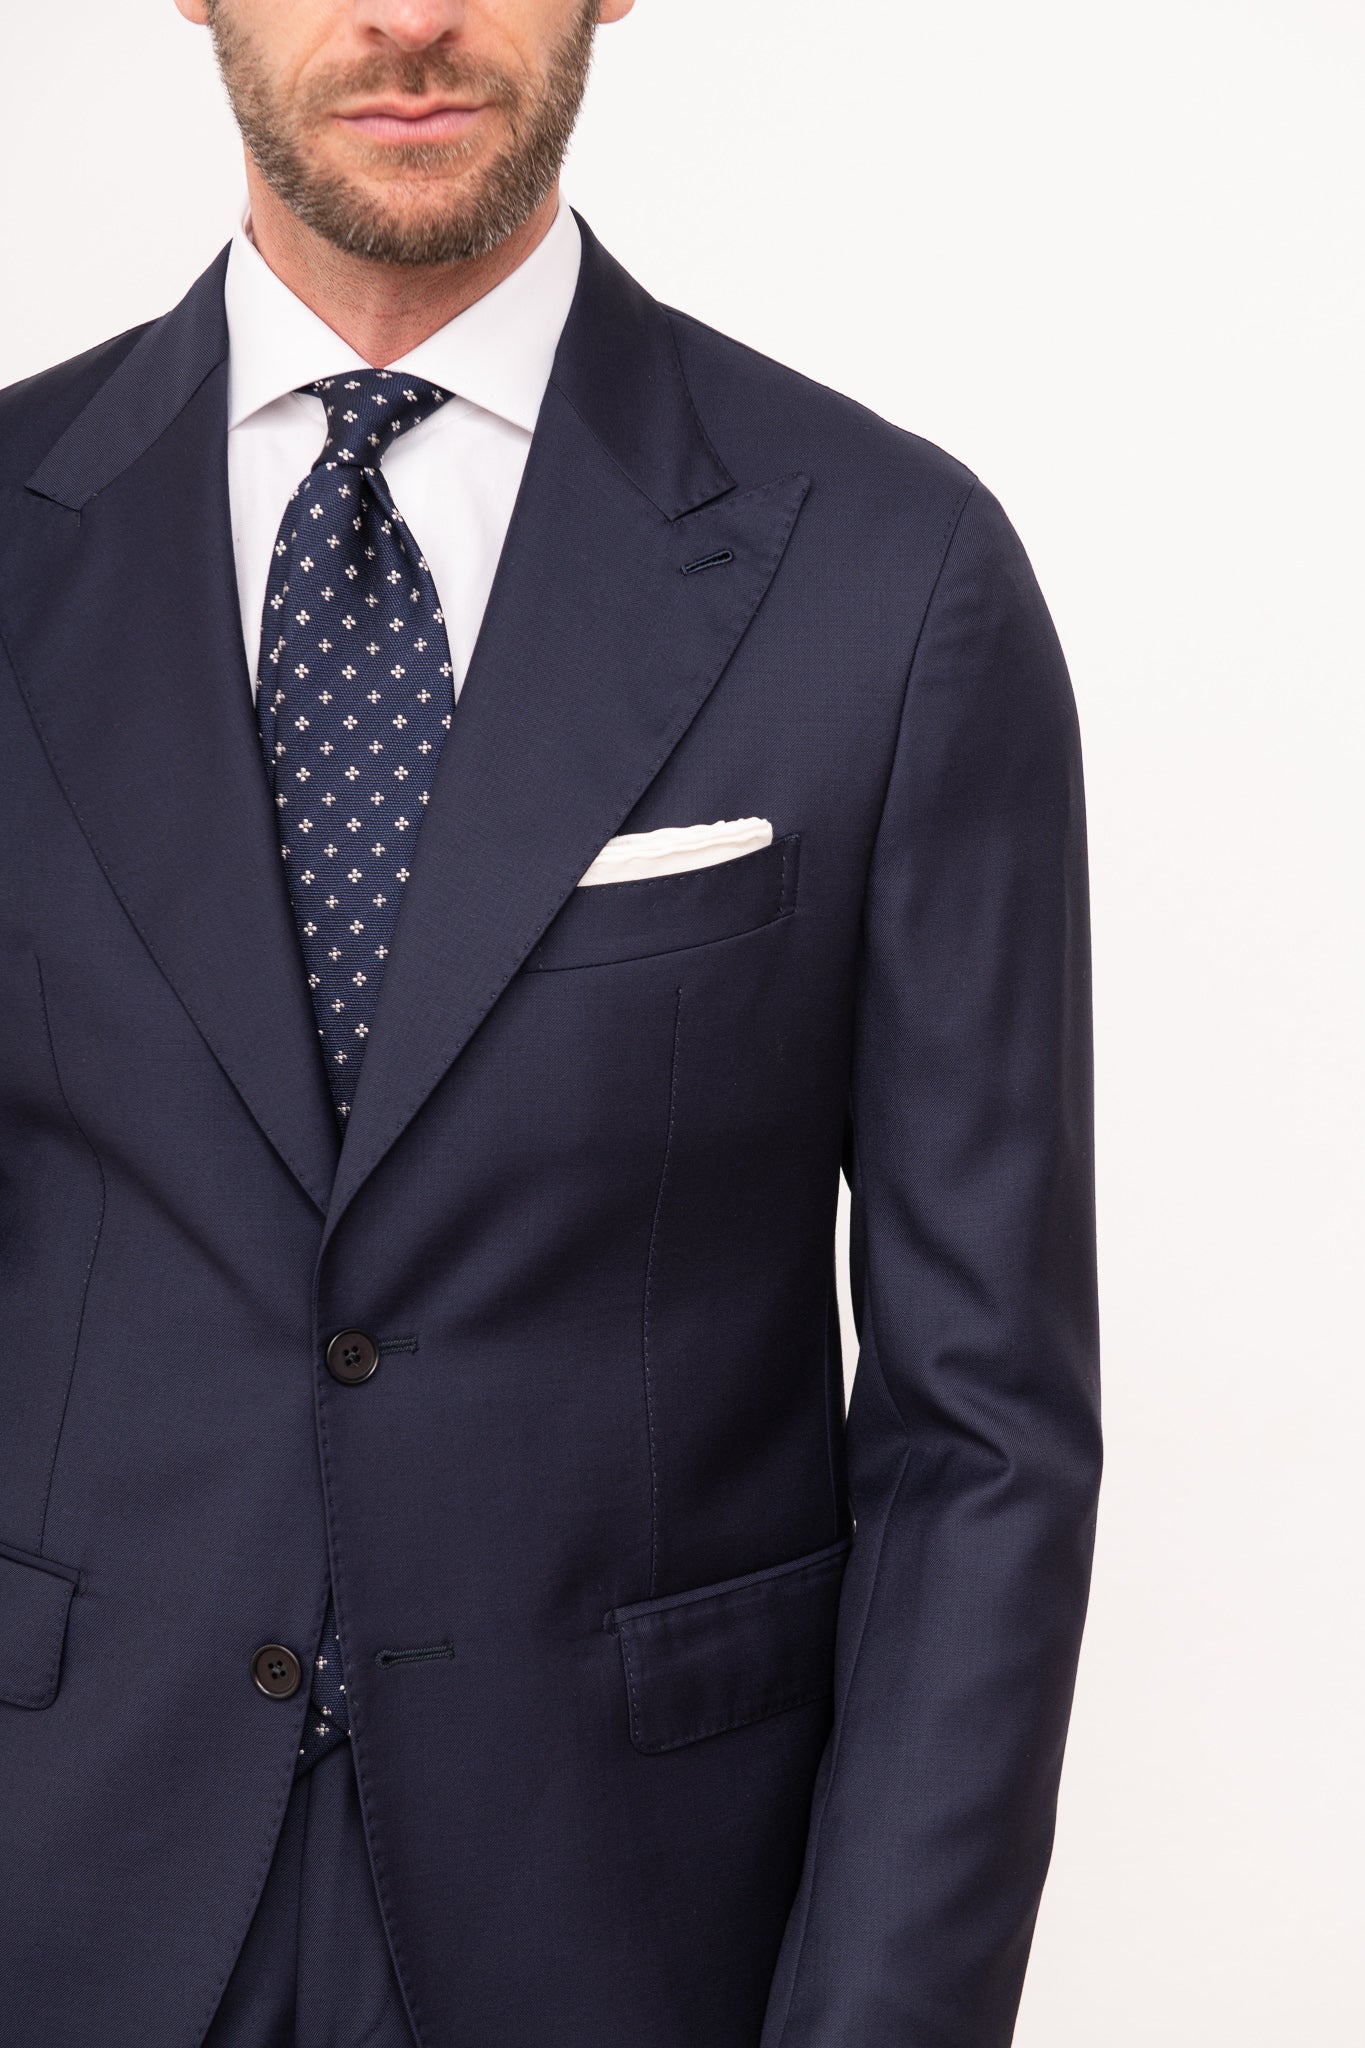 Blue suit "Soragna Capsule Collection" - Made in Italy